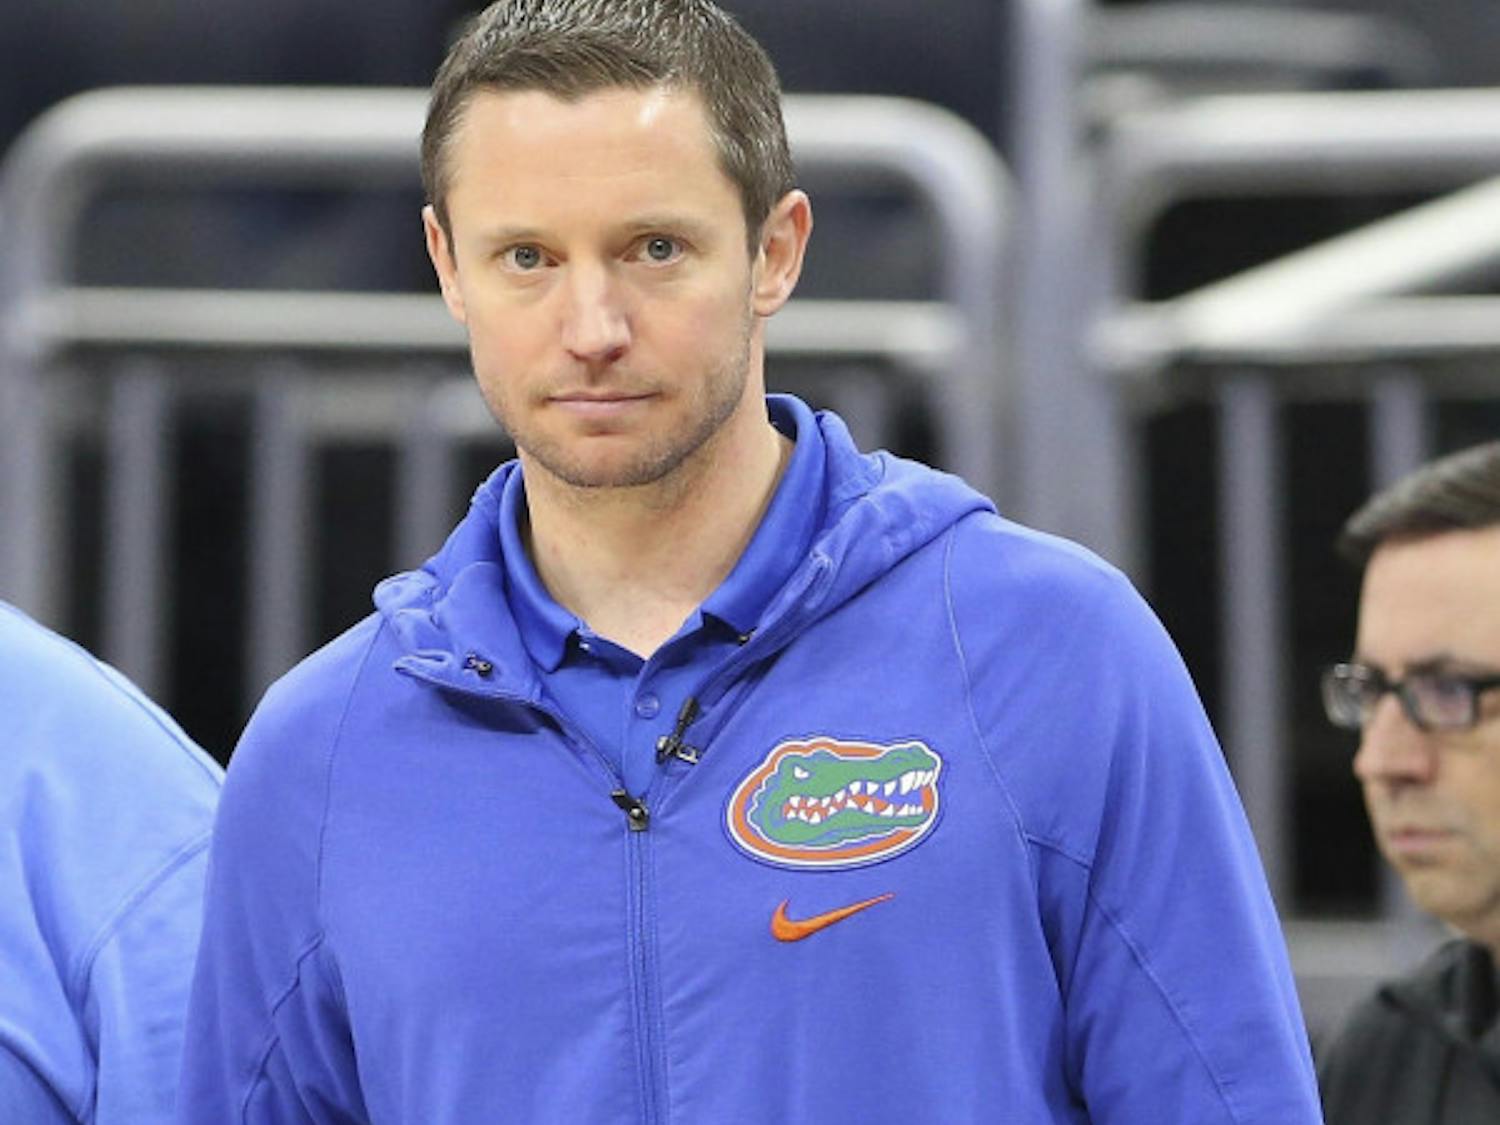 Florida head coach Mike White looks on during a practice session for the NCAA March Madness Tournament at the Amway Center in Orlando, Fla. on Wednesday, March 15, 2017. (Stephen M. Dowell/Orlando Sentinel via AP)